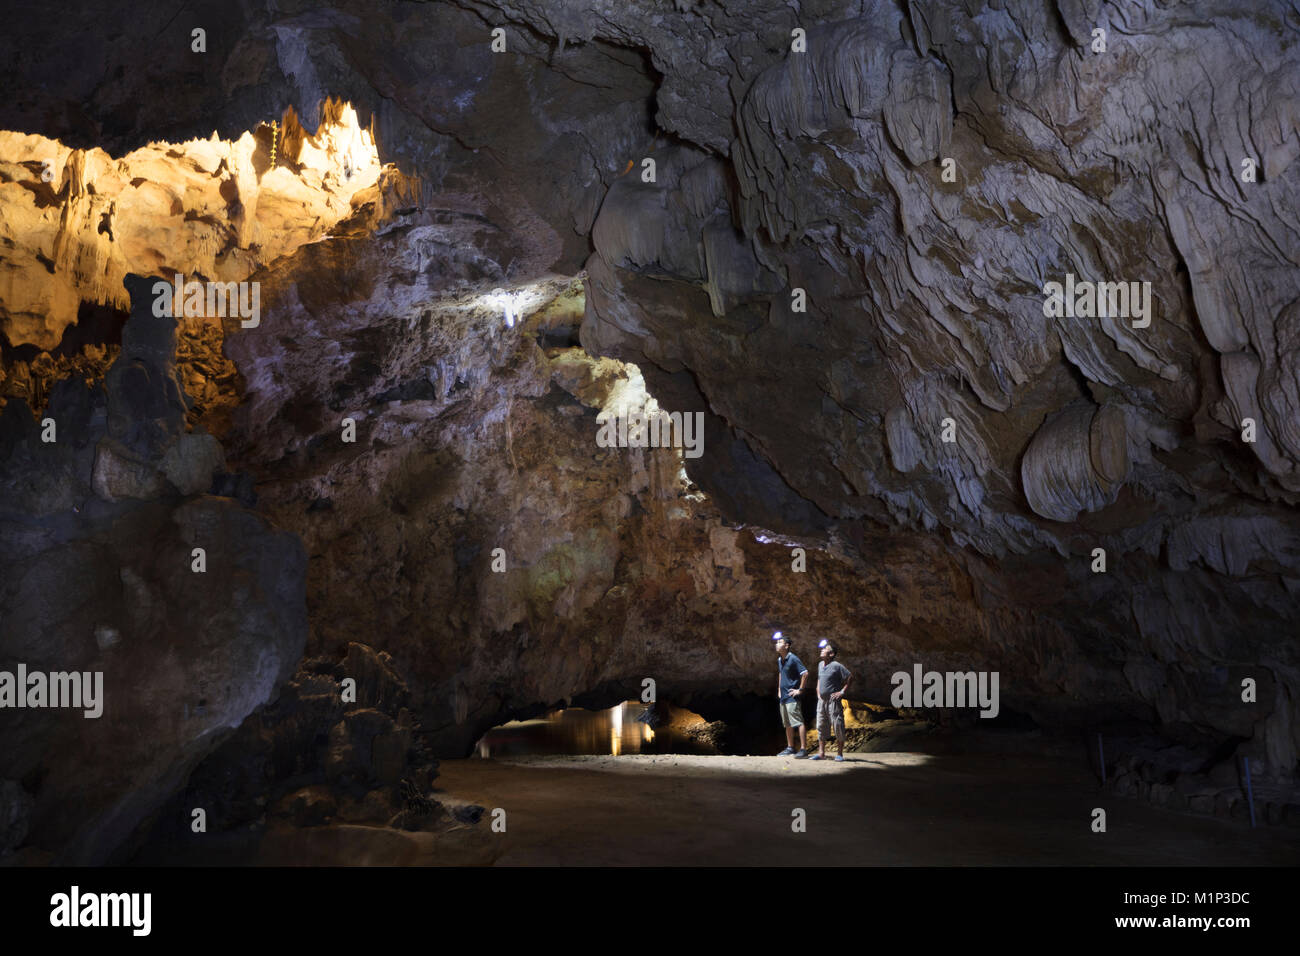 Hikers in the interior of Galaxy cave on the Ben Dang River in Thien Ha, Ninh Binh, Vietnam, Indochina, Southeast Asia, Asia Stock Photo